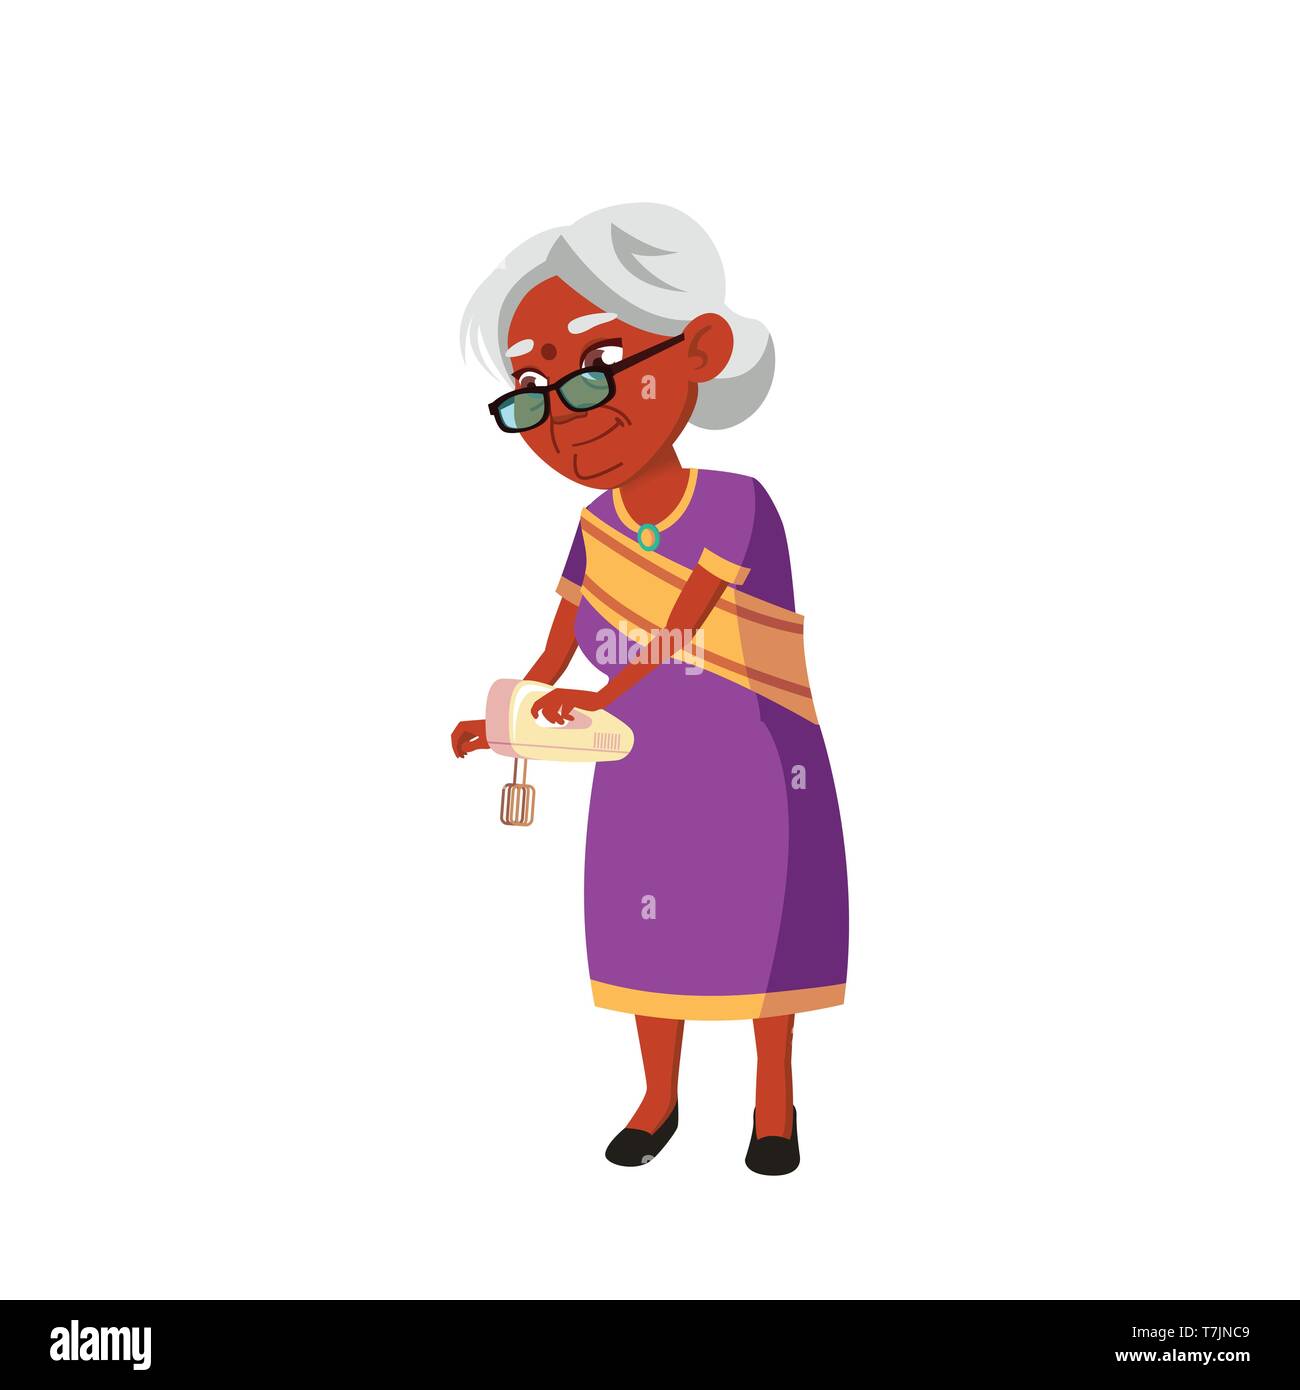 Elderly woman india Stock Vector Images - Alamy